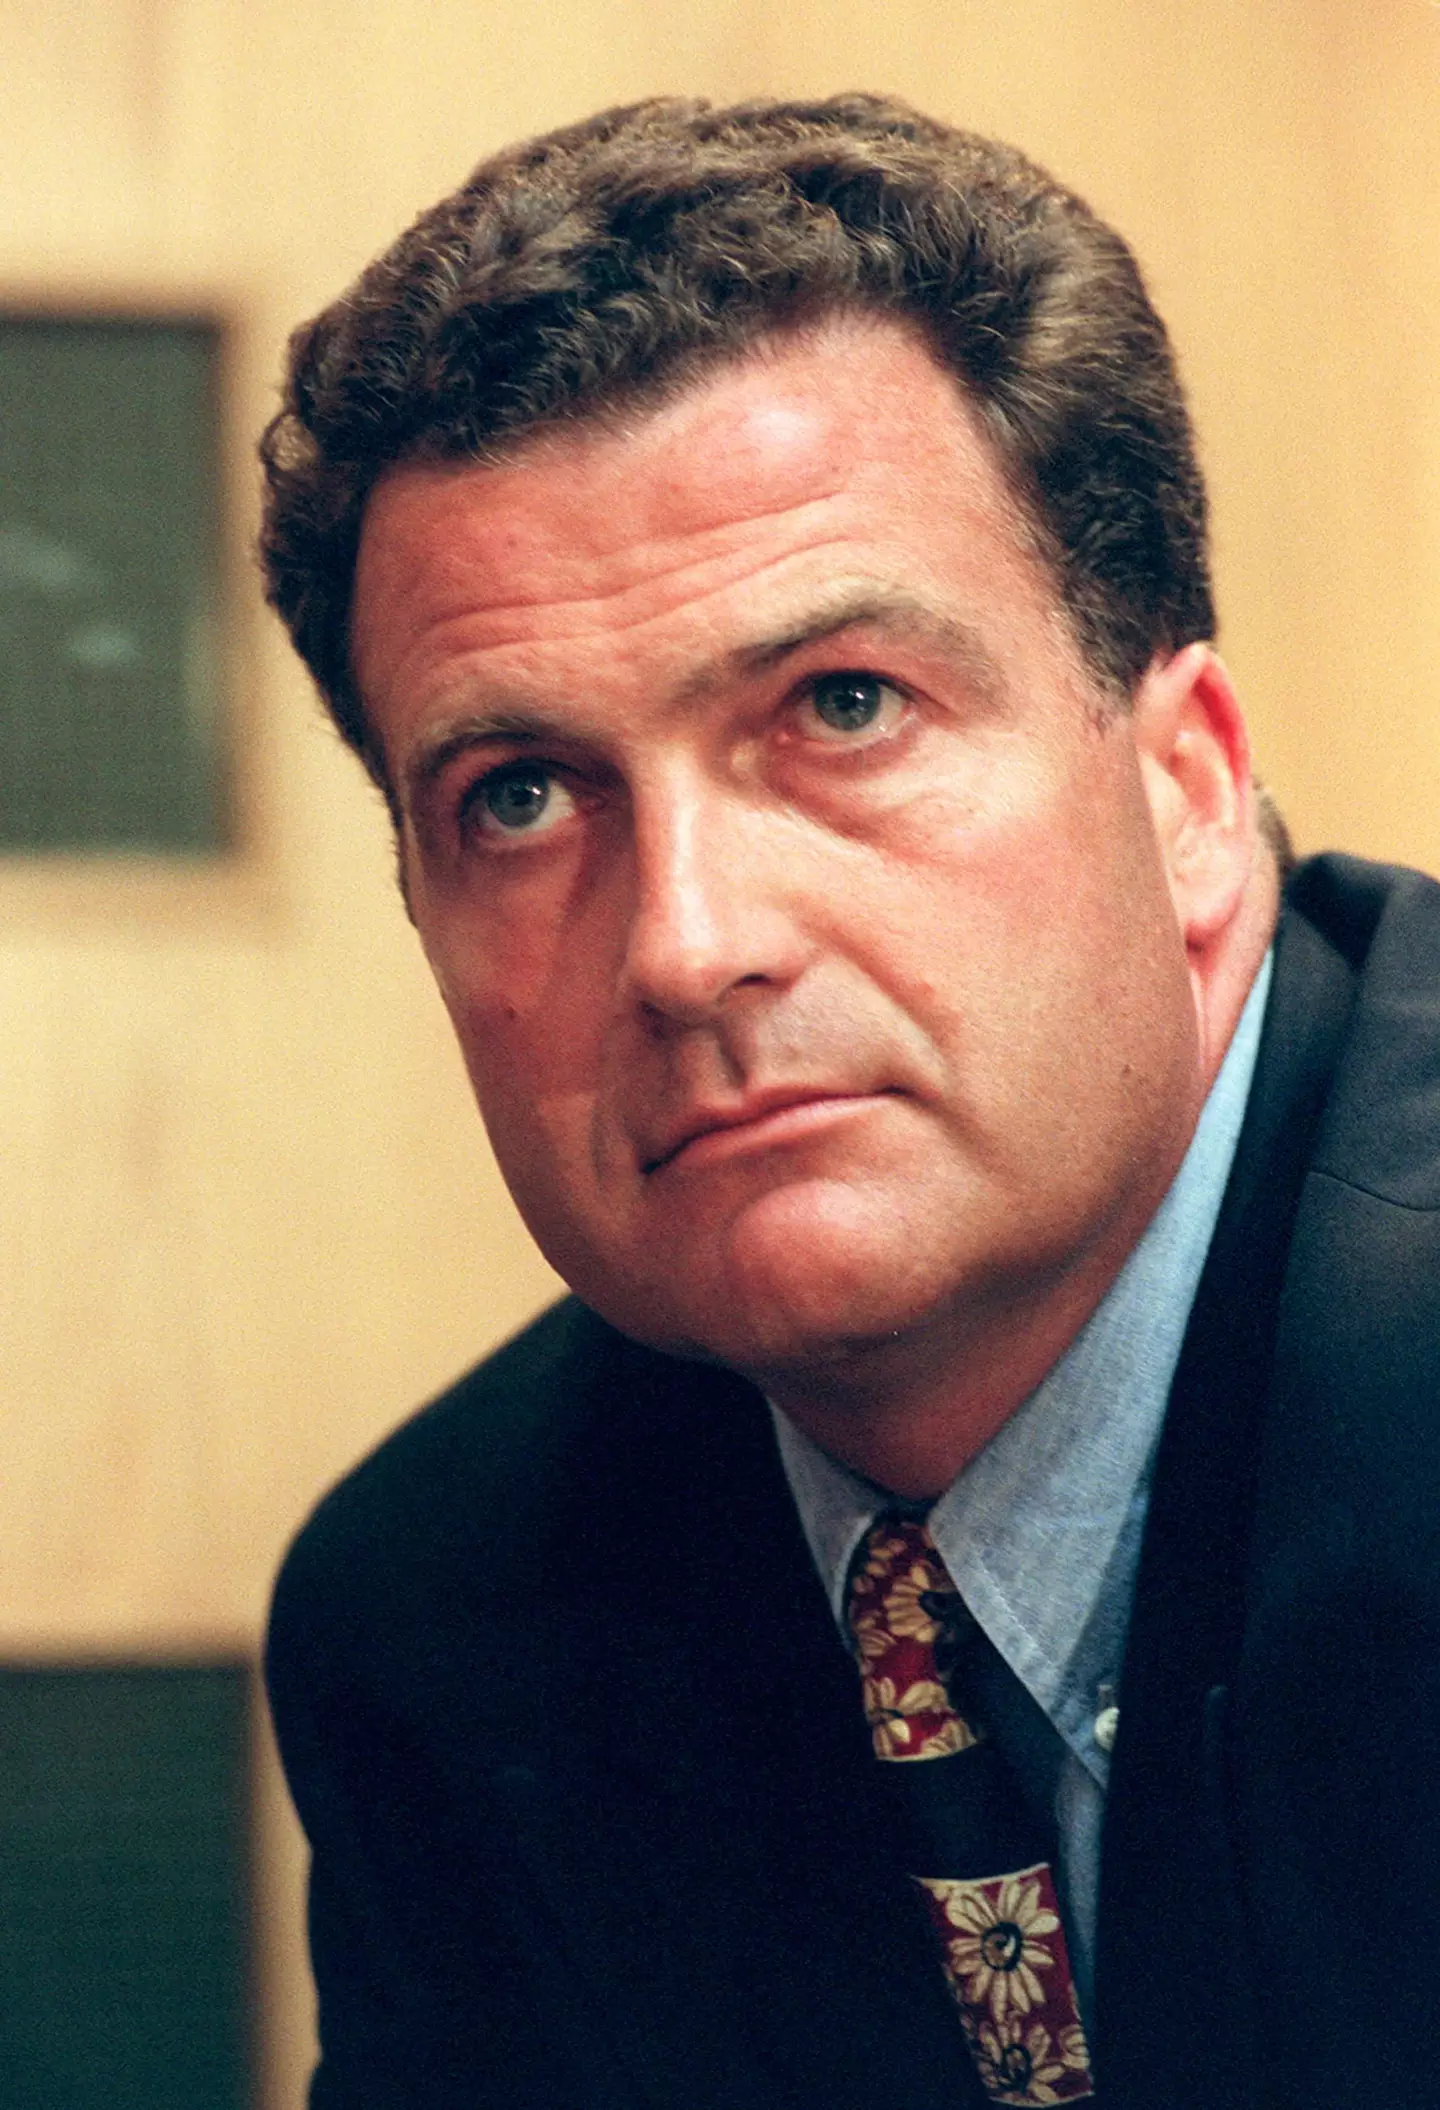 John Nichol, photographed in 1998 at a news conference.